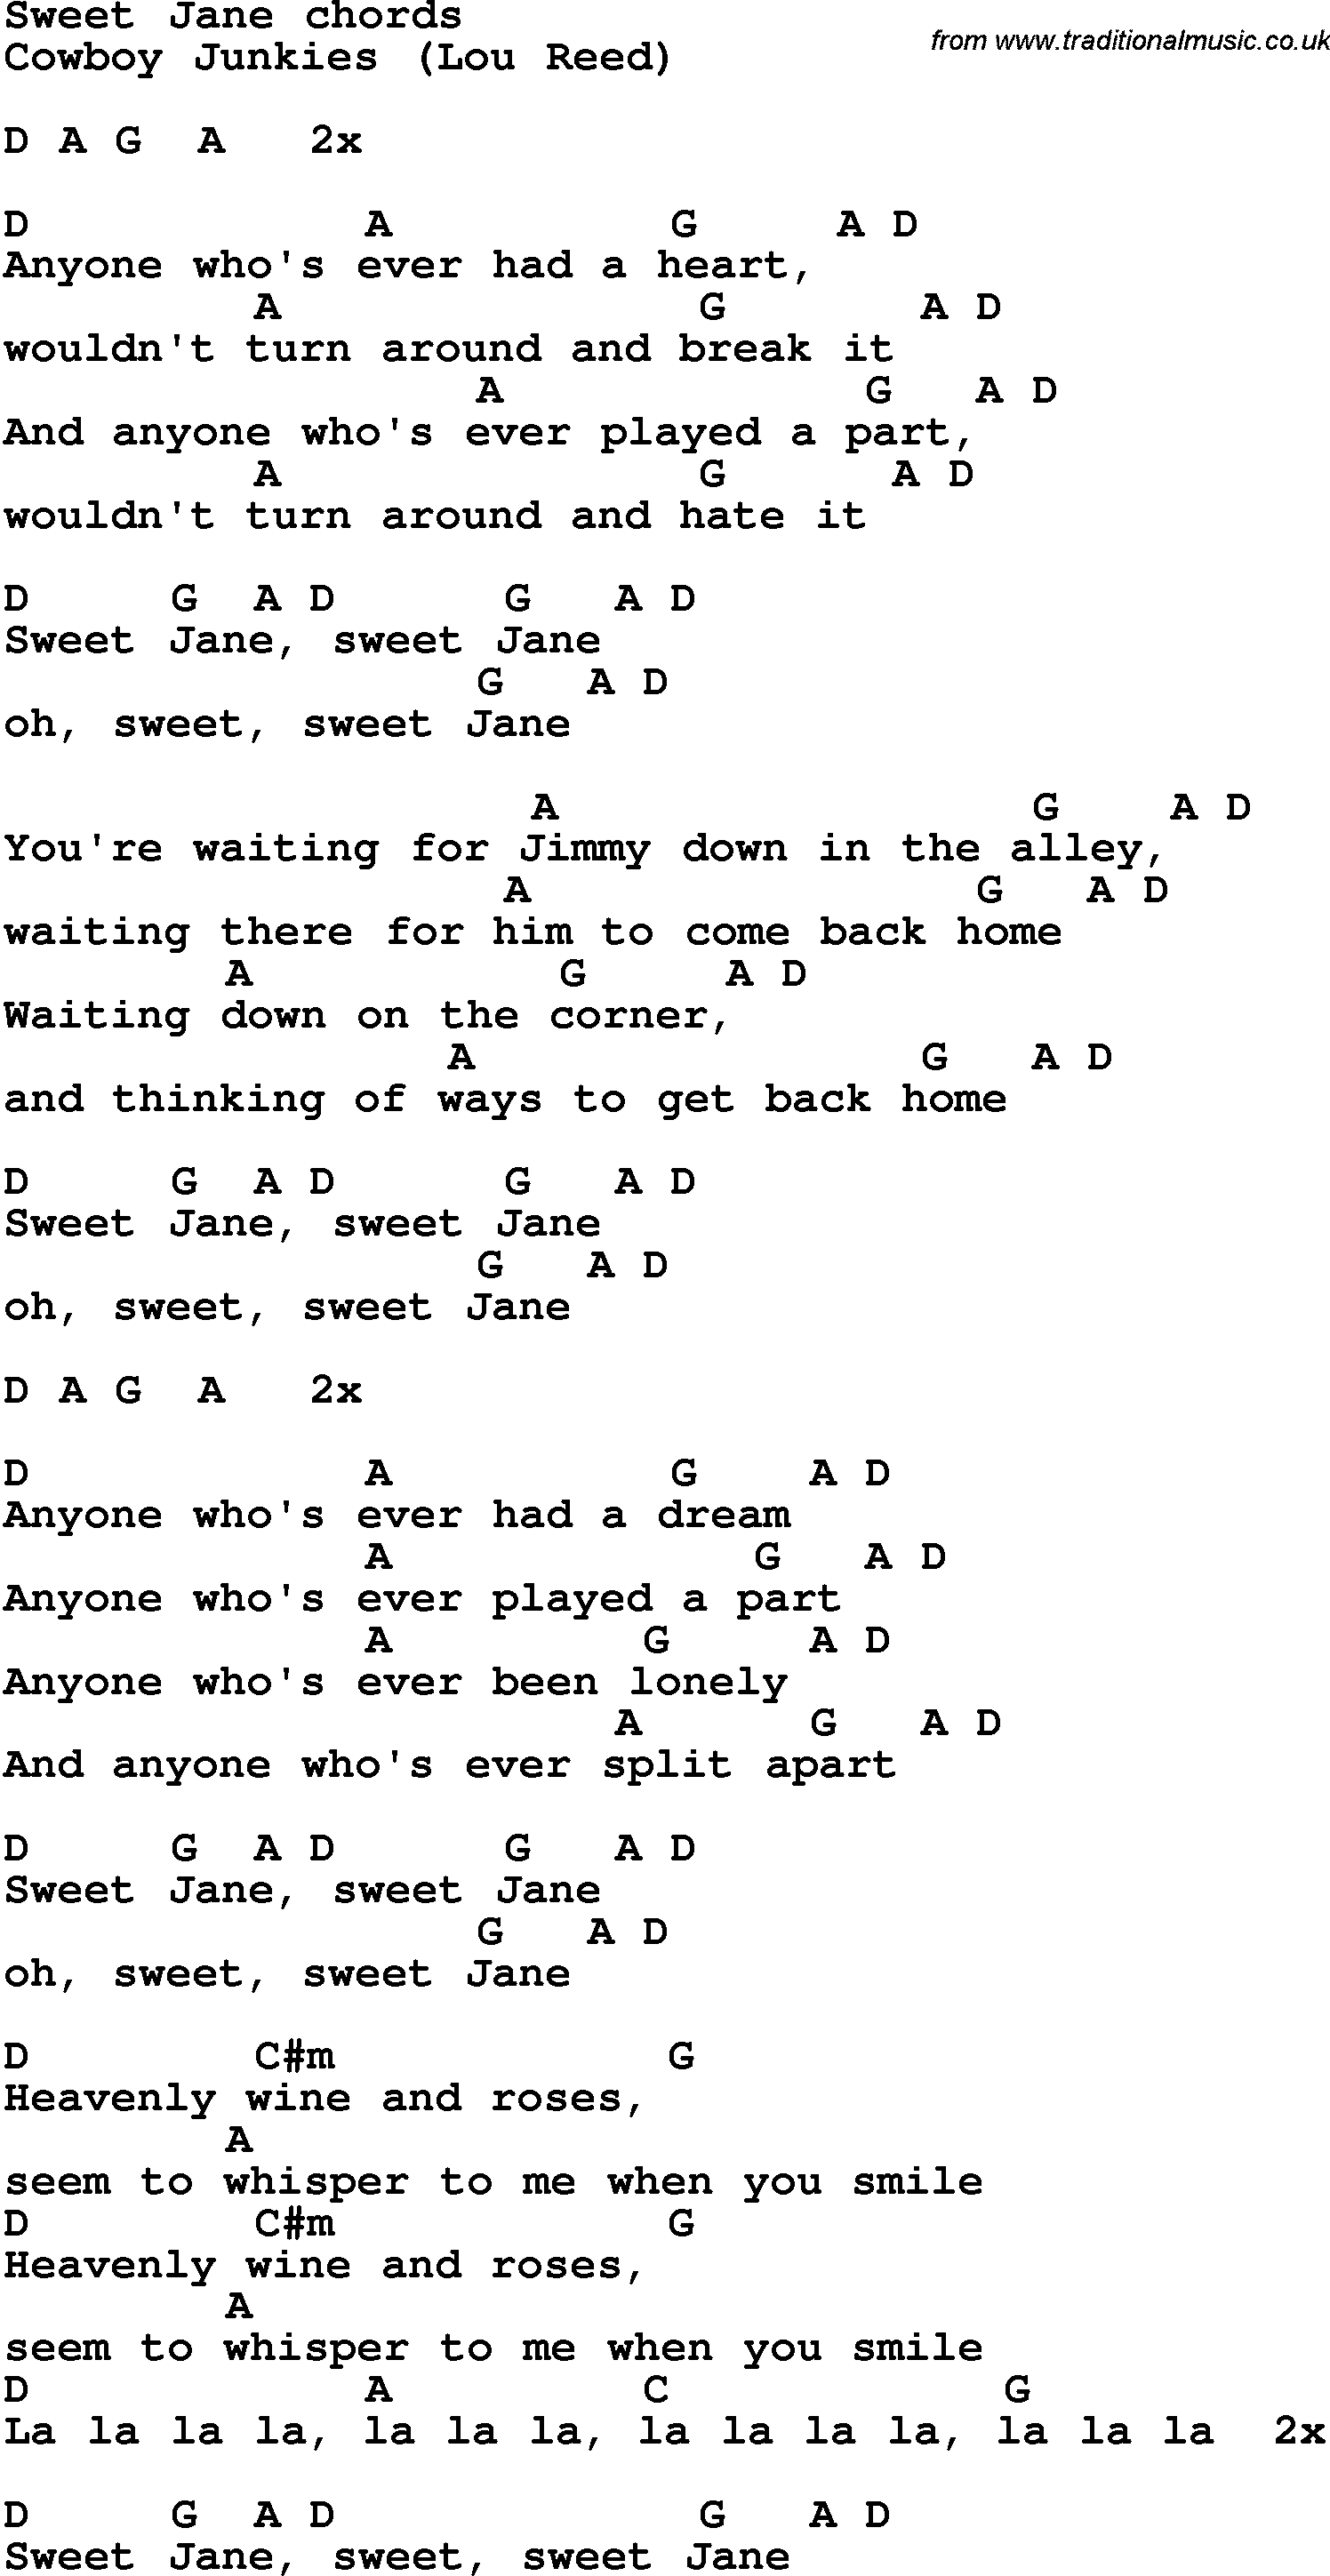 Song Lyrics with guitar chords for Sweet Jane